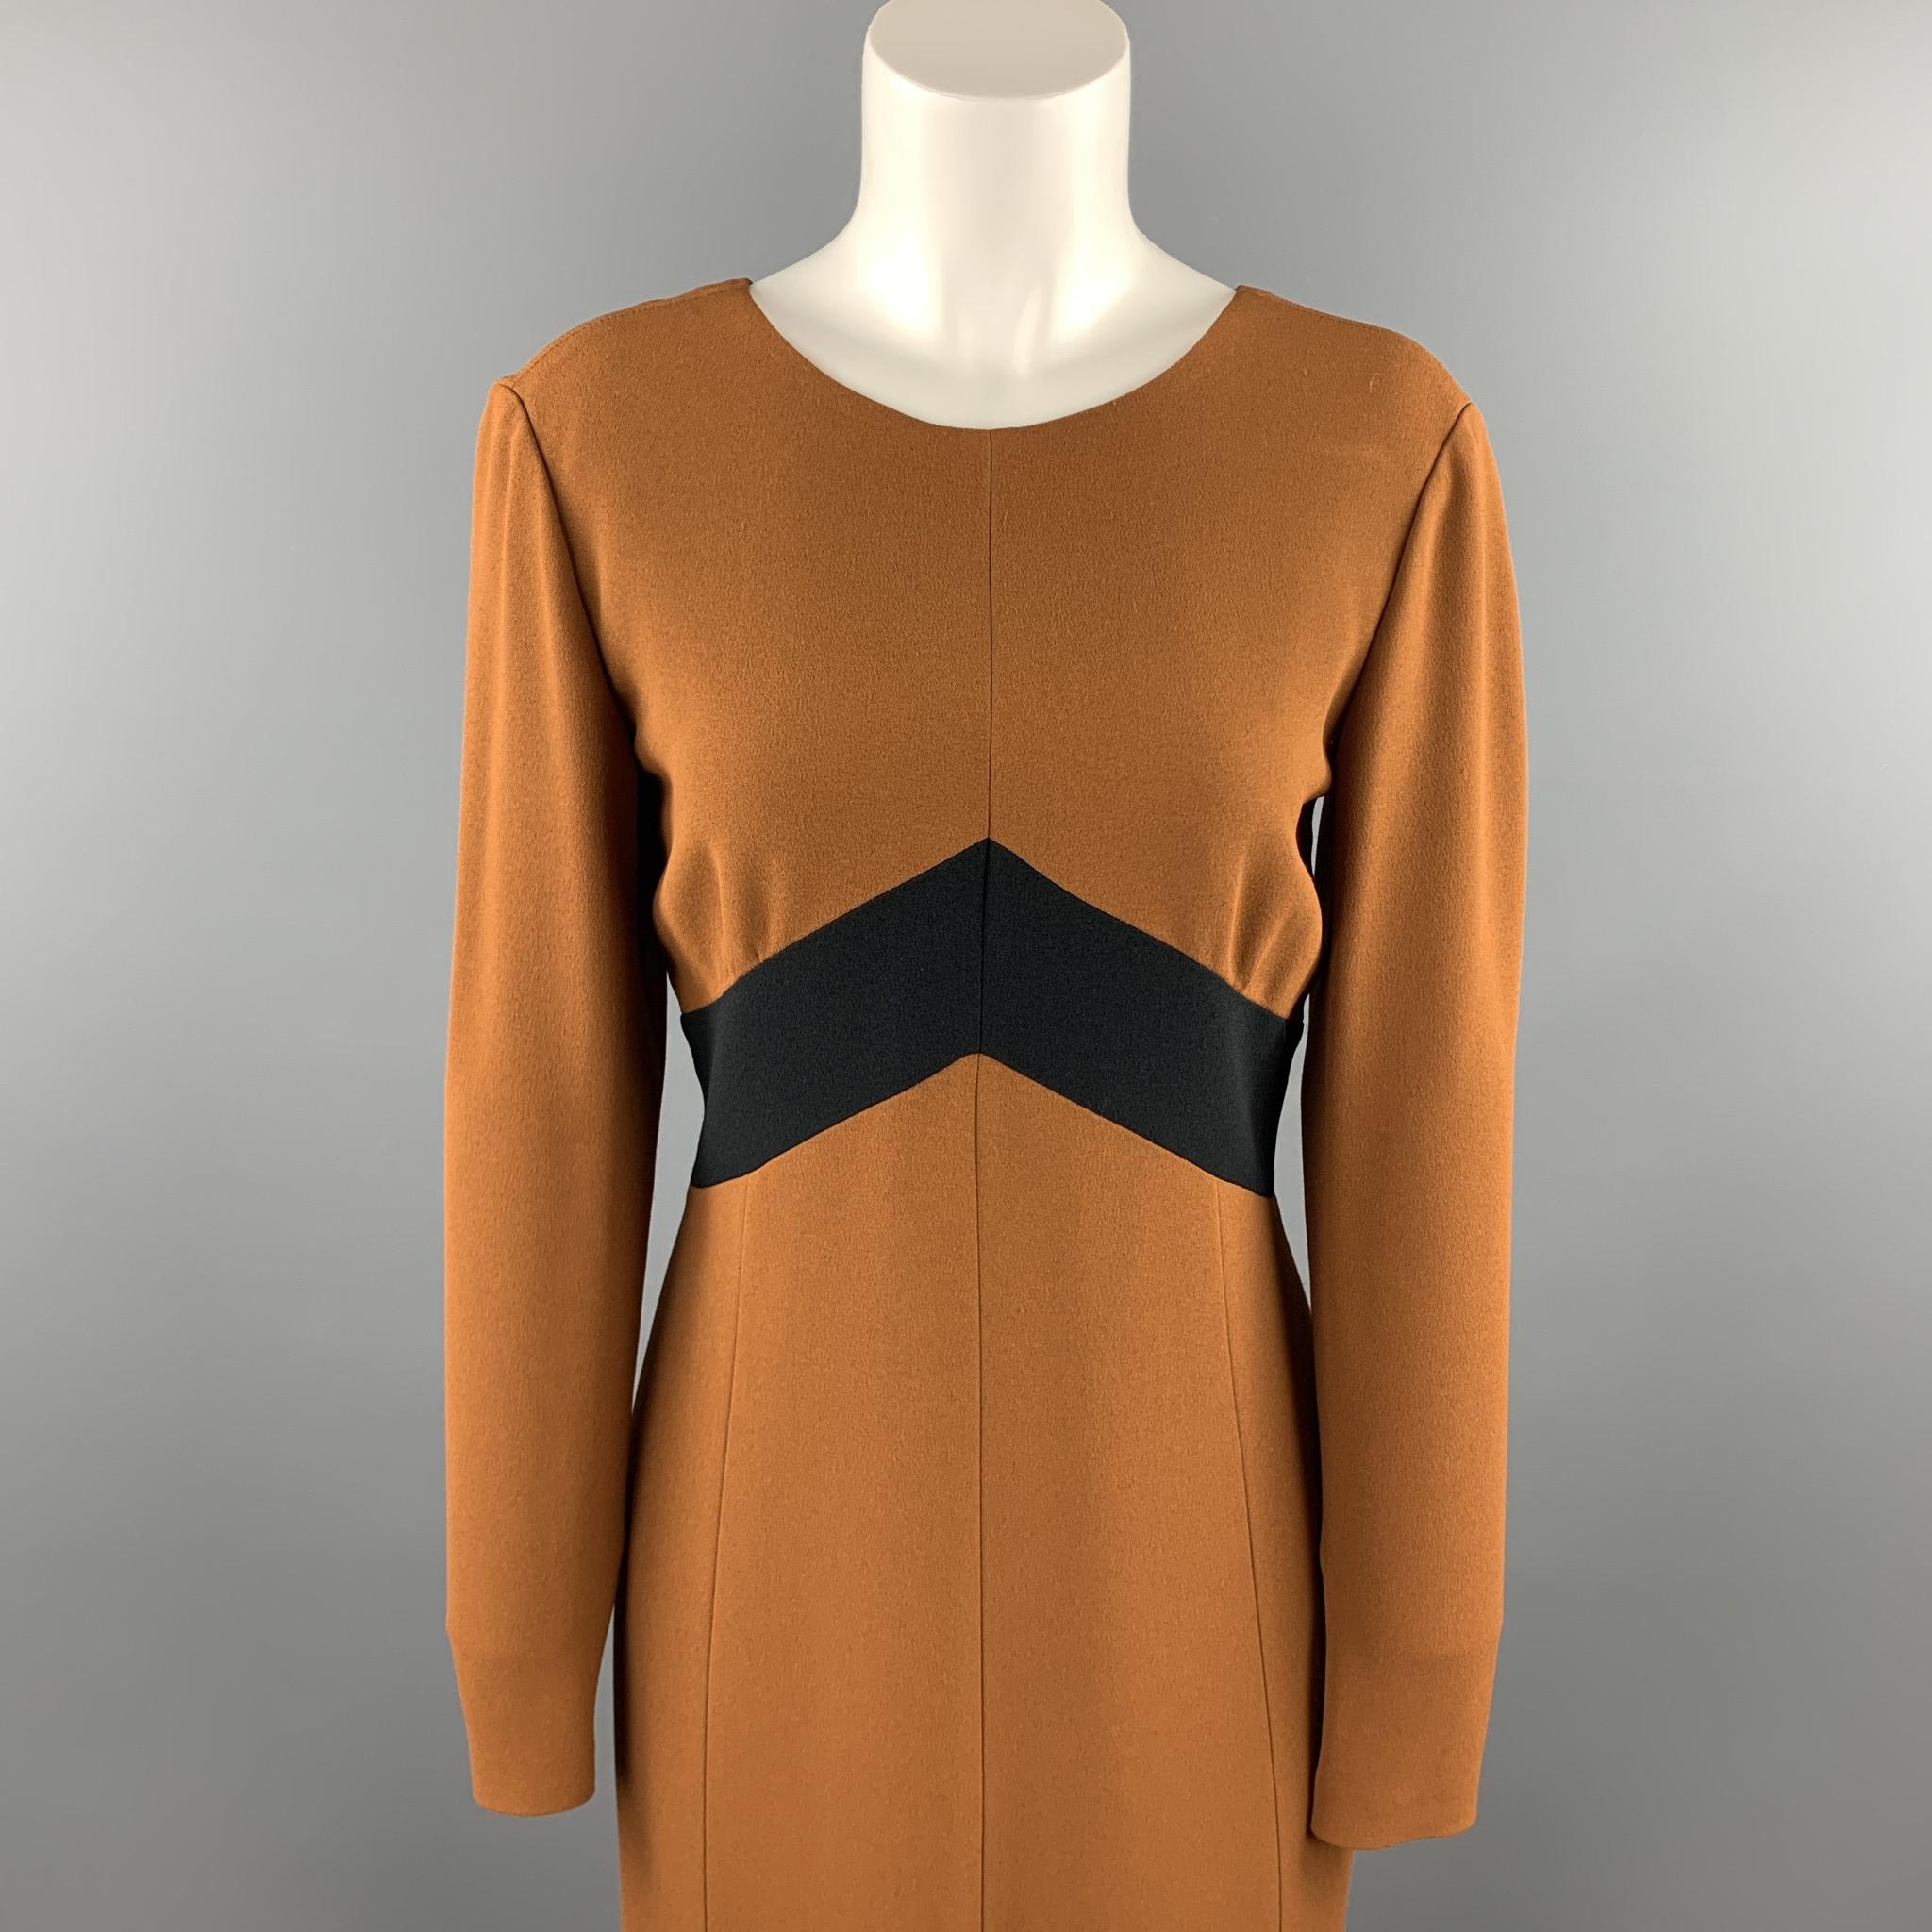 BURBERRY PRORSUM long sleeve dress comes in a rust brown crepe with a black panel detail featuring an a-line style, single vent, and a back zip up closure. Made in Italy.

Excellent Pre-Owned Condition.
Marked: IT 44
Original Retail Price: